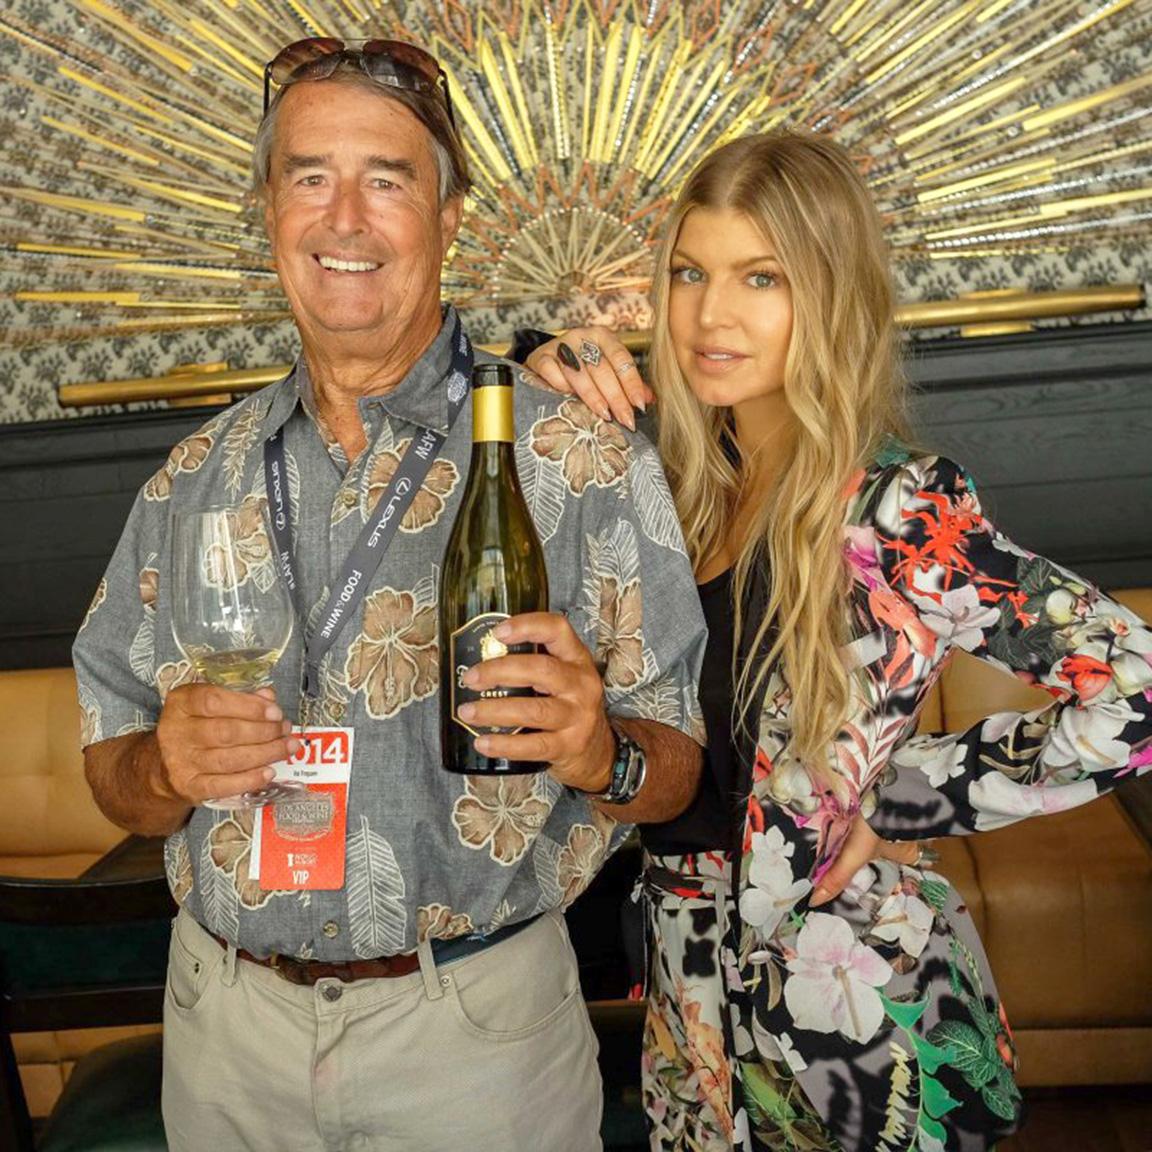 RT @FergusonCrest: #LikeFatherLikeDaughter… #winelovers & #winemakers.???????????? #FergusonCrest #tbt #fathersday #LAFW14 http://t.co/hTYixLRndS ht…